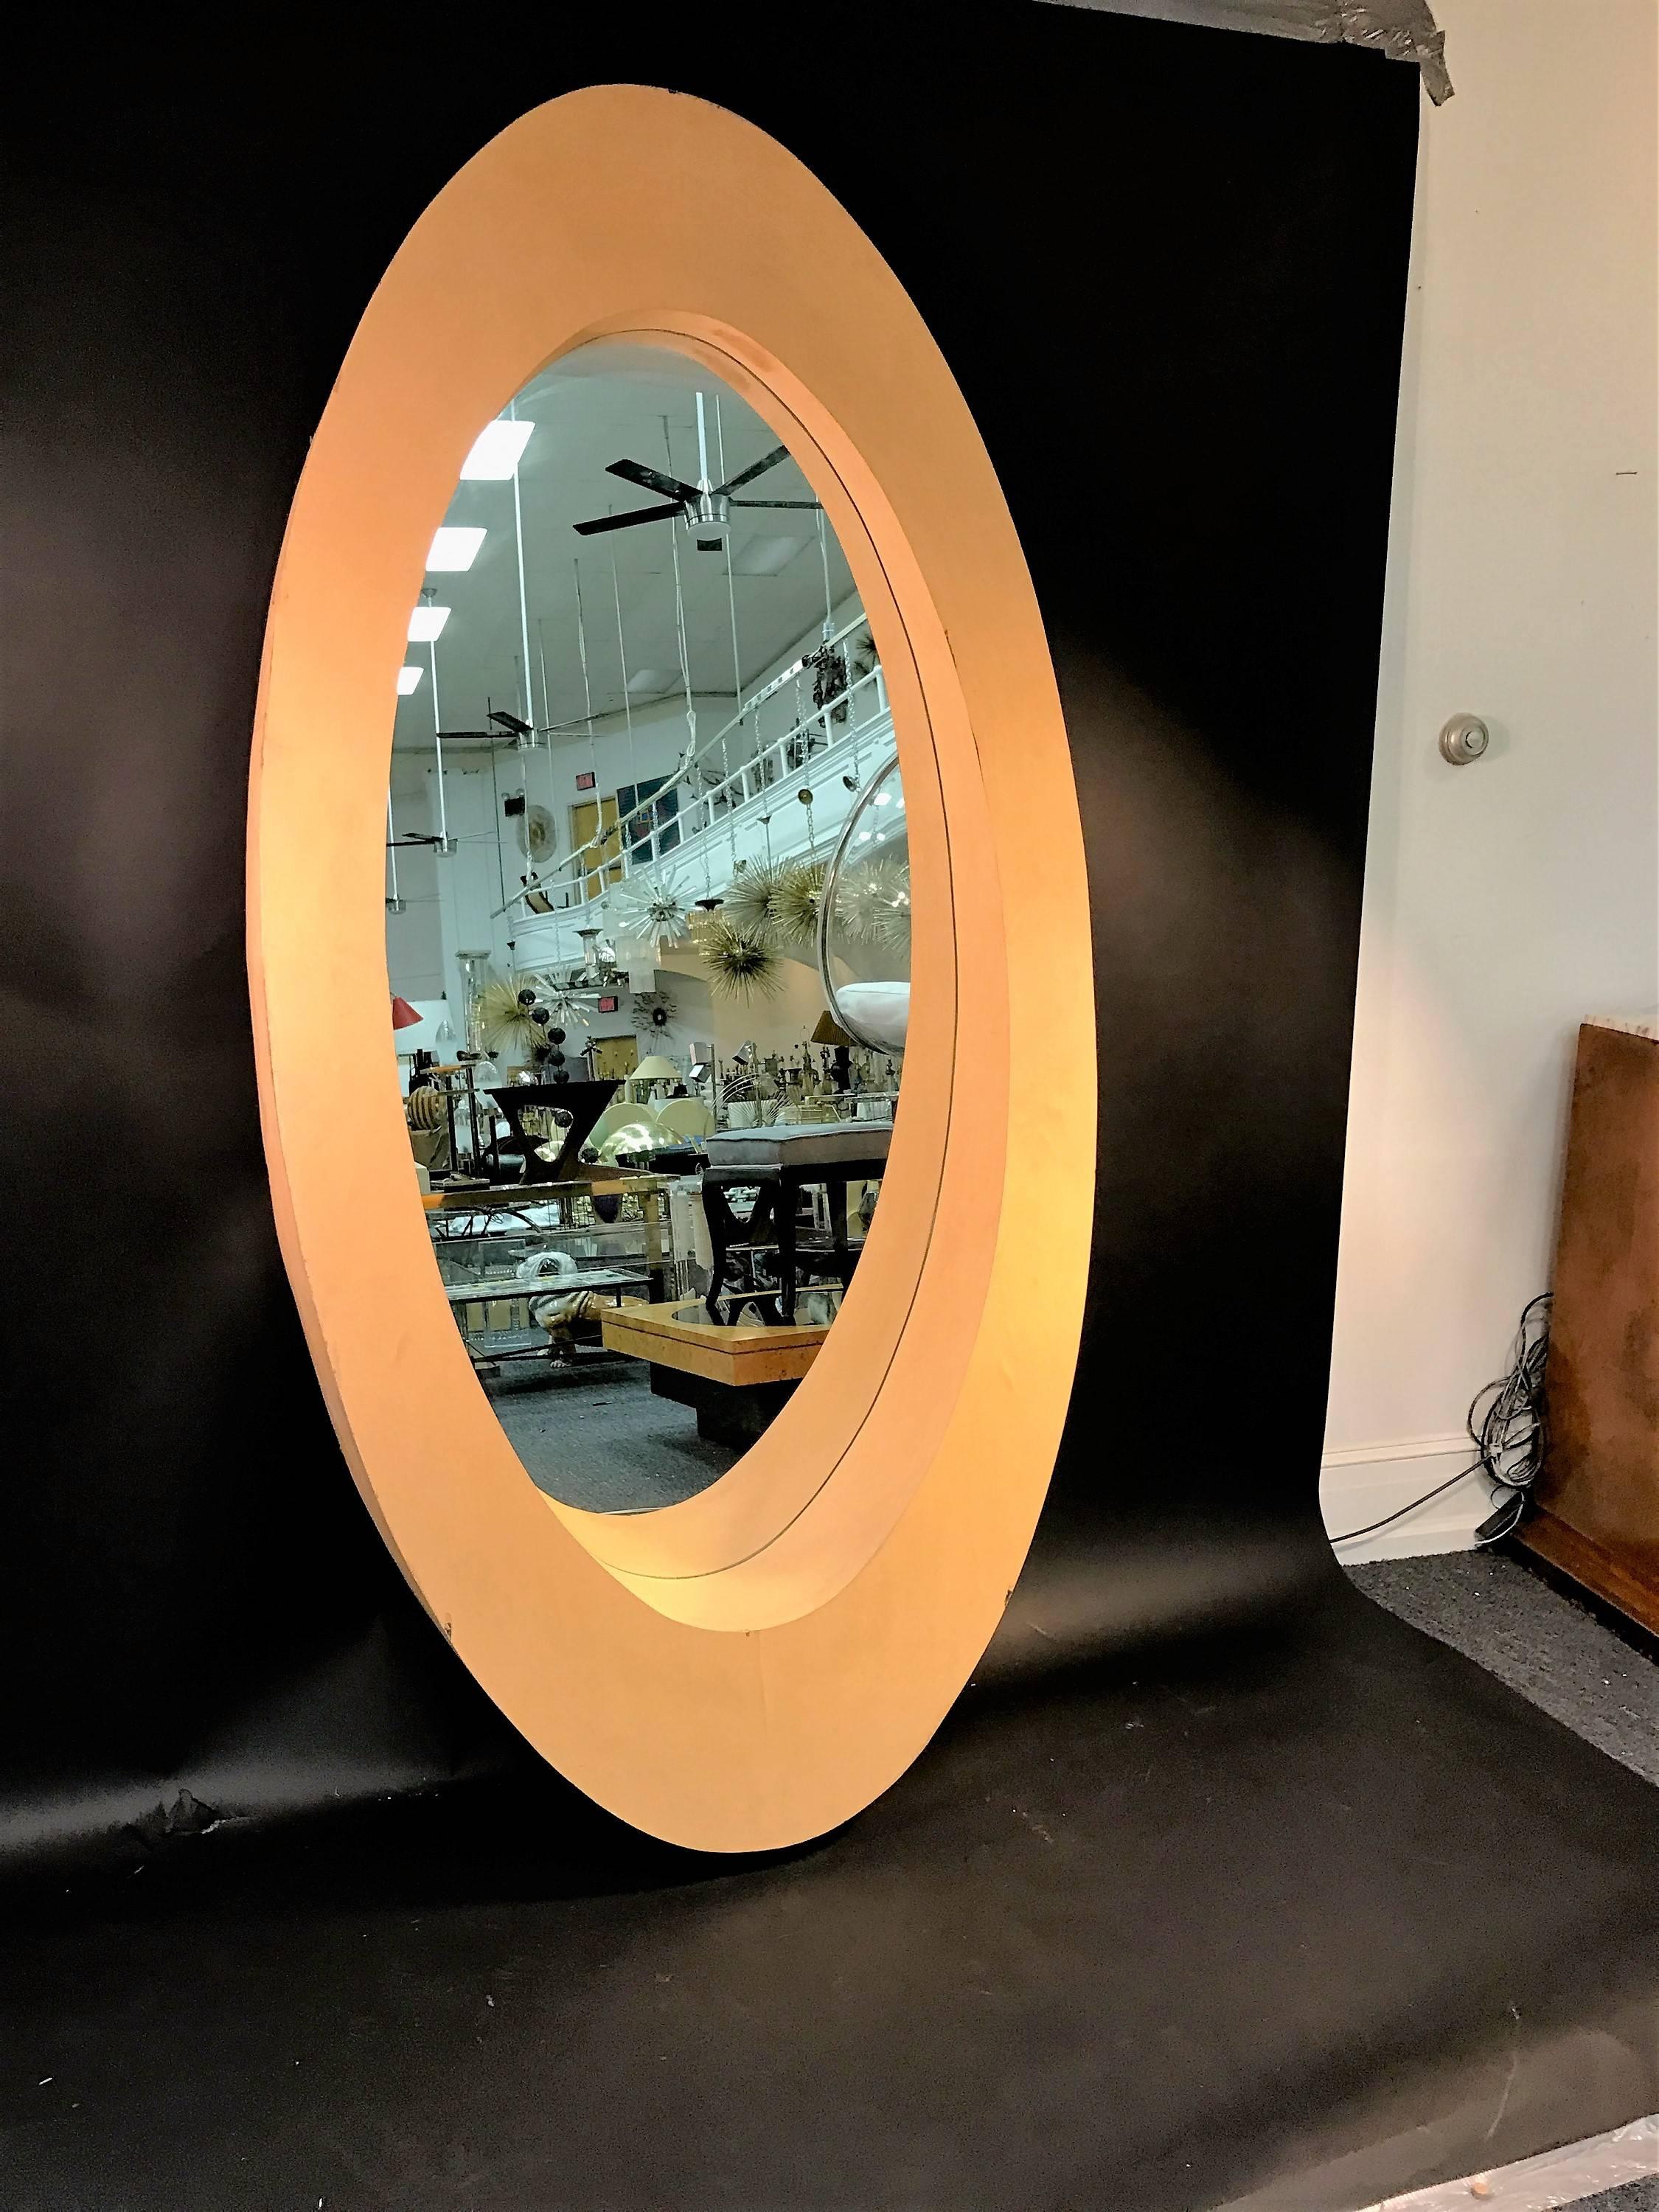 American Amazing Monumental Pair of 1970s Elliptical Wood Modern Mirrors For Sale